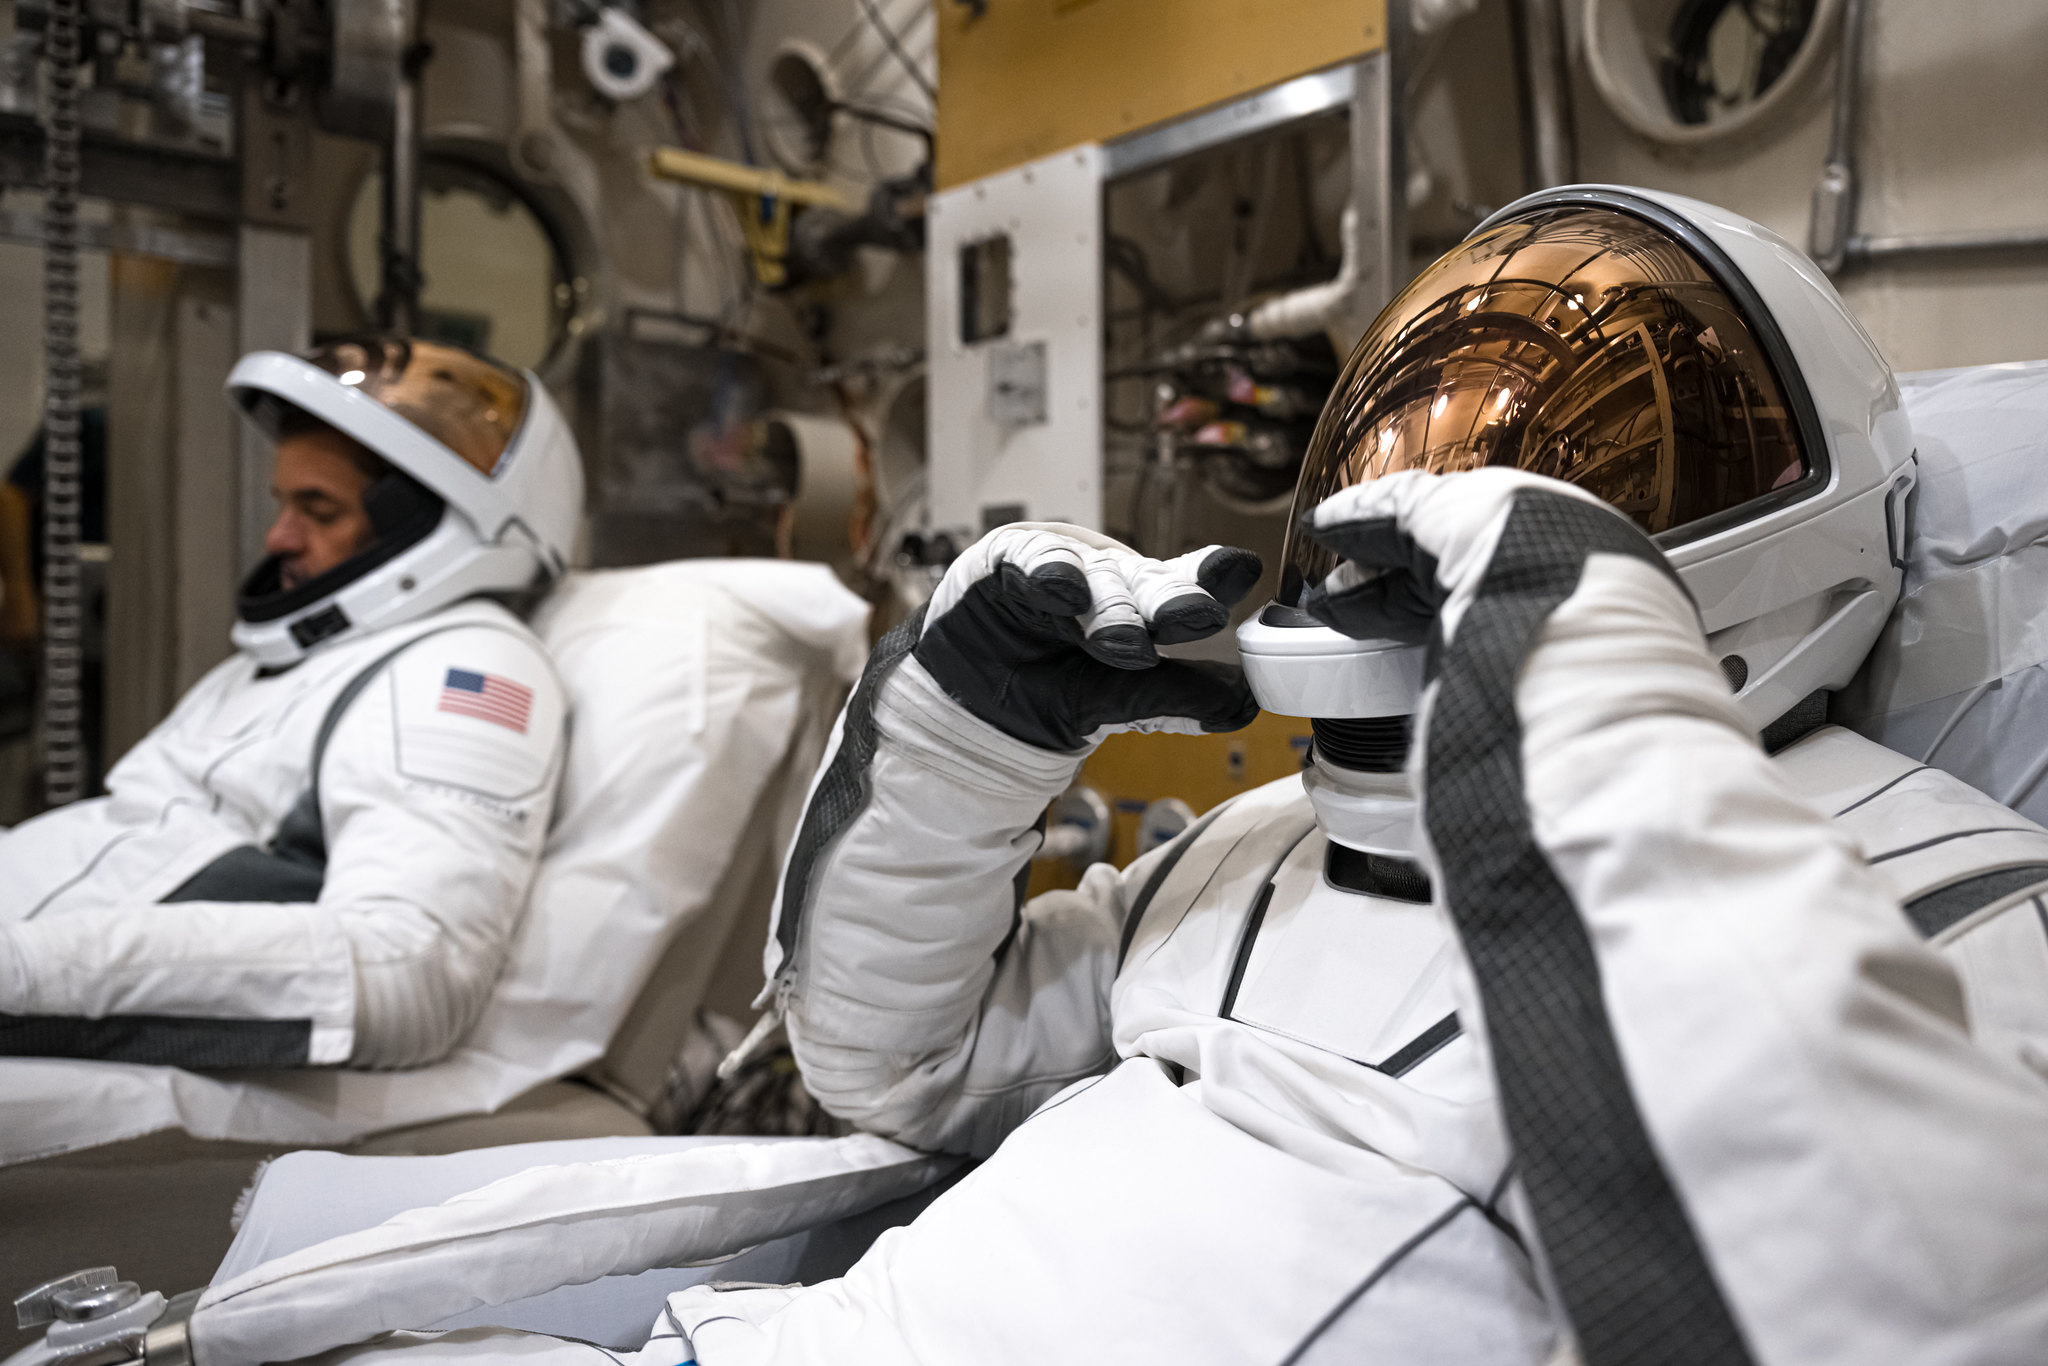 Polaris First light team presentations off new SpaceX spacesuits for 1st personal spacewalk (footage)